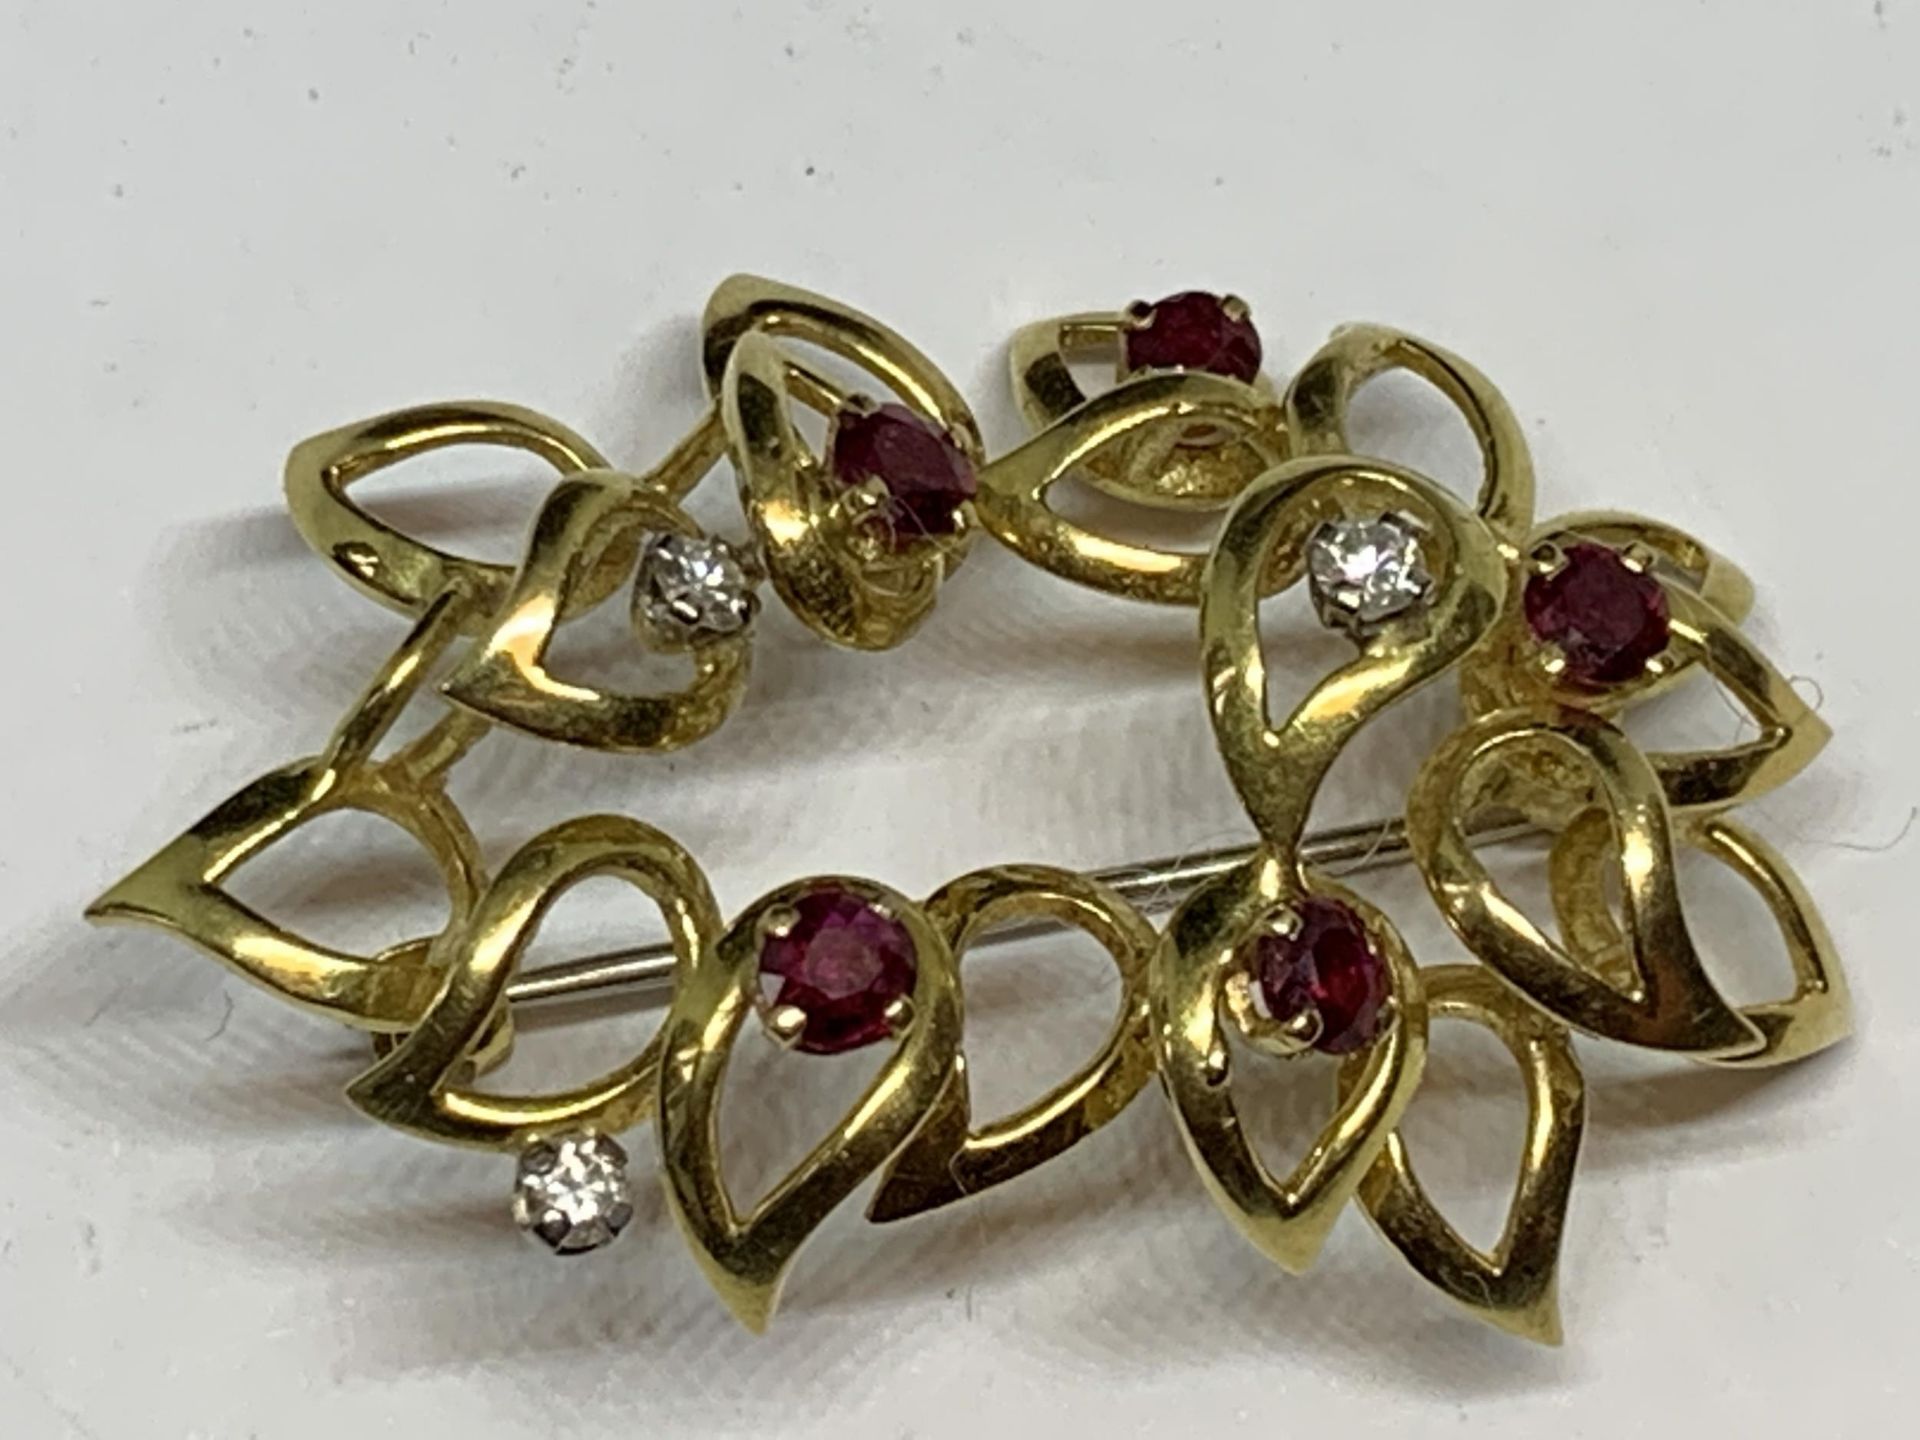 A 9 CARAT GOLD BROOCH SET WITH THREE DIAMOND AND FIVE RUBIES IN A PRESENTATION BOX - Image 2 of 4